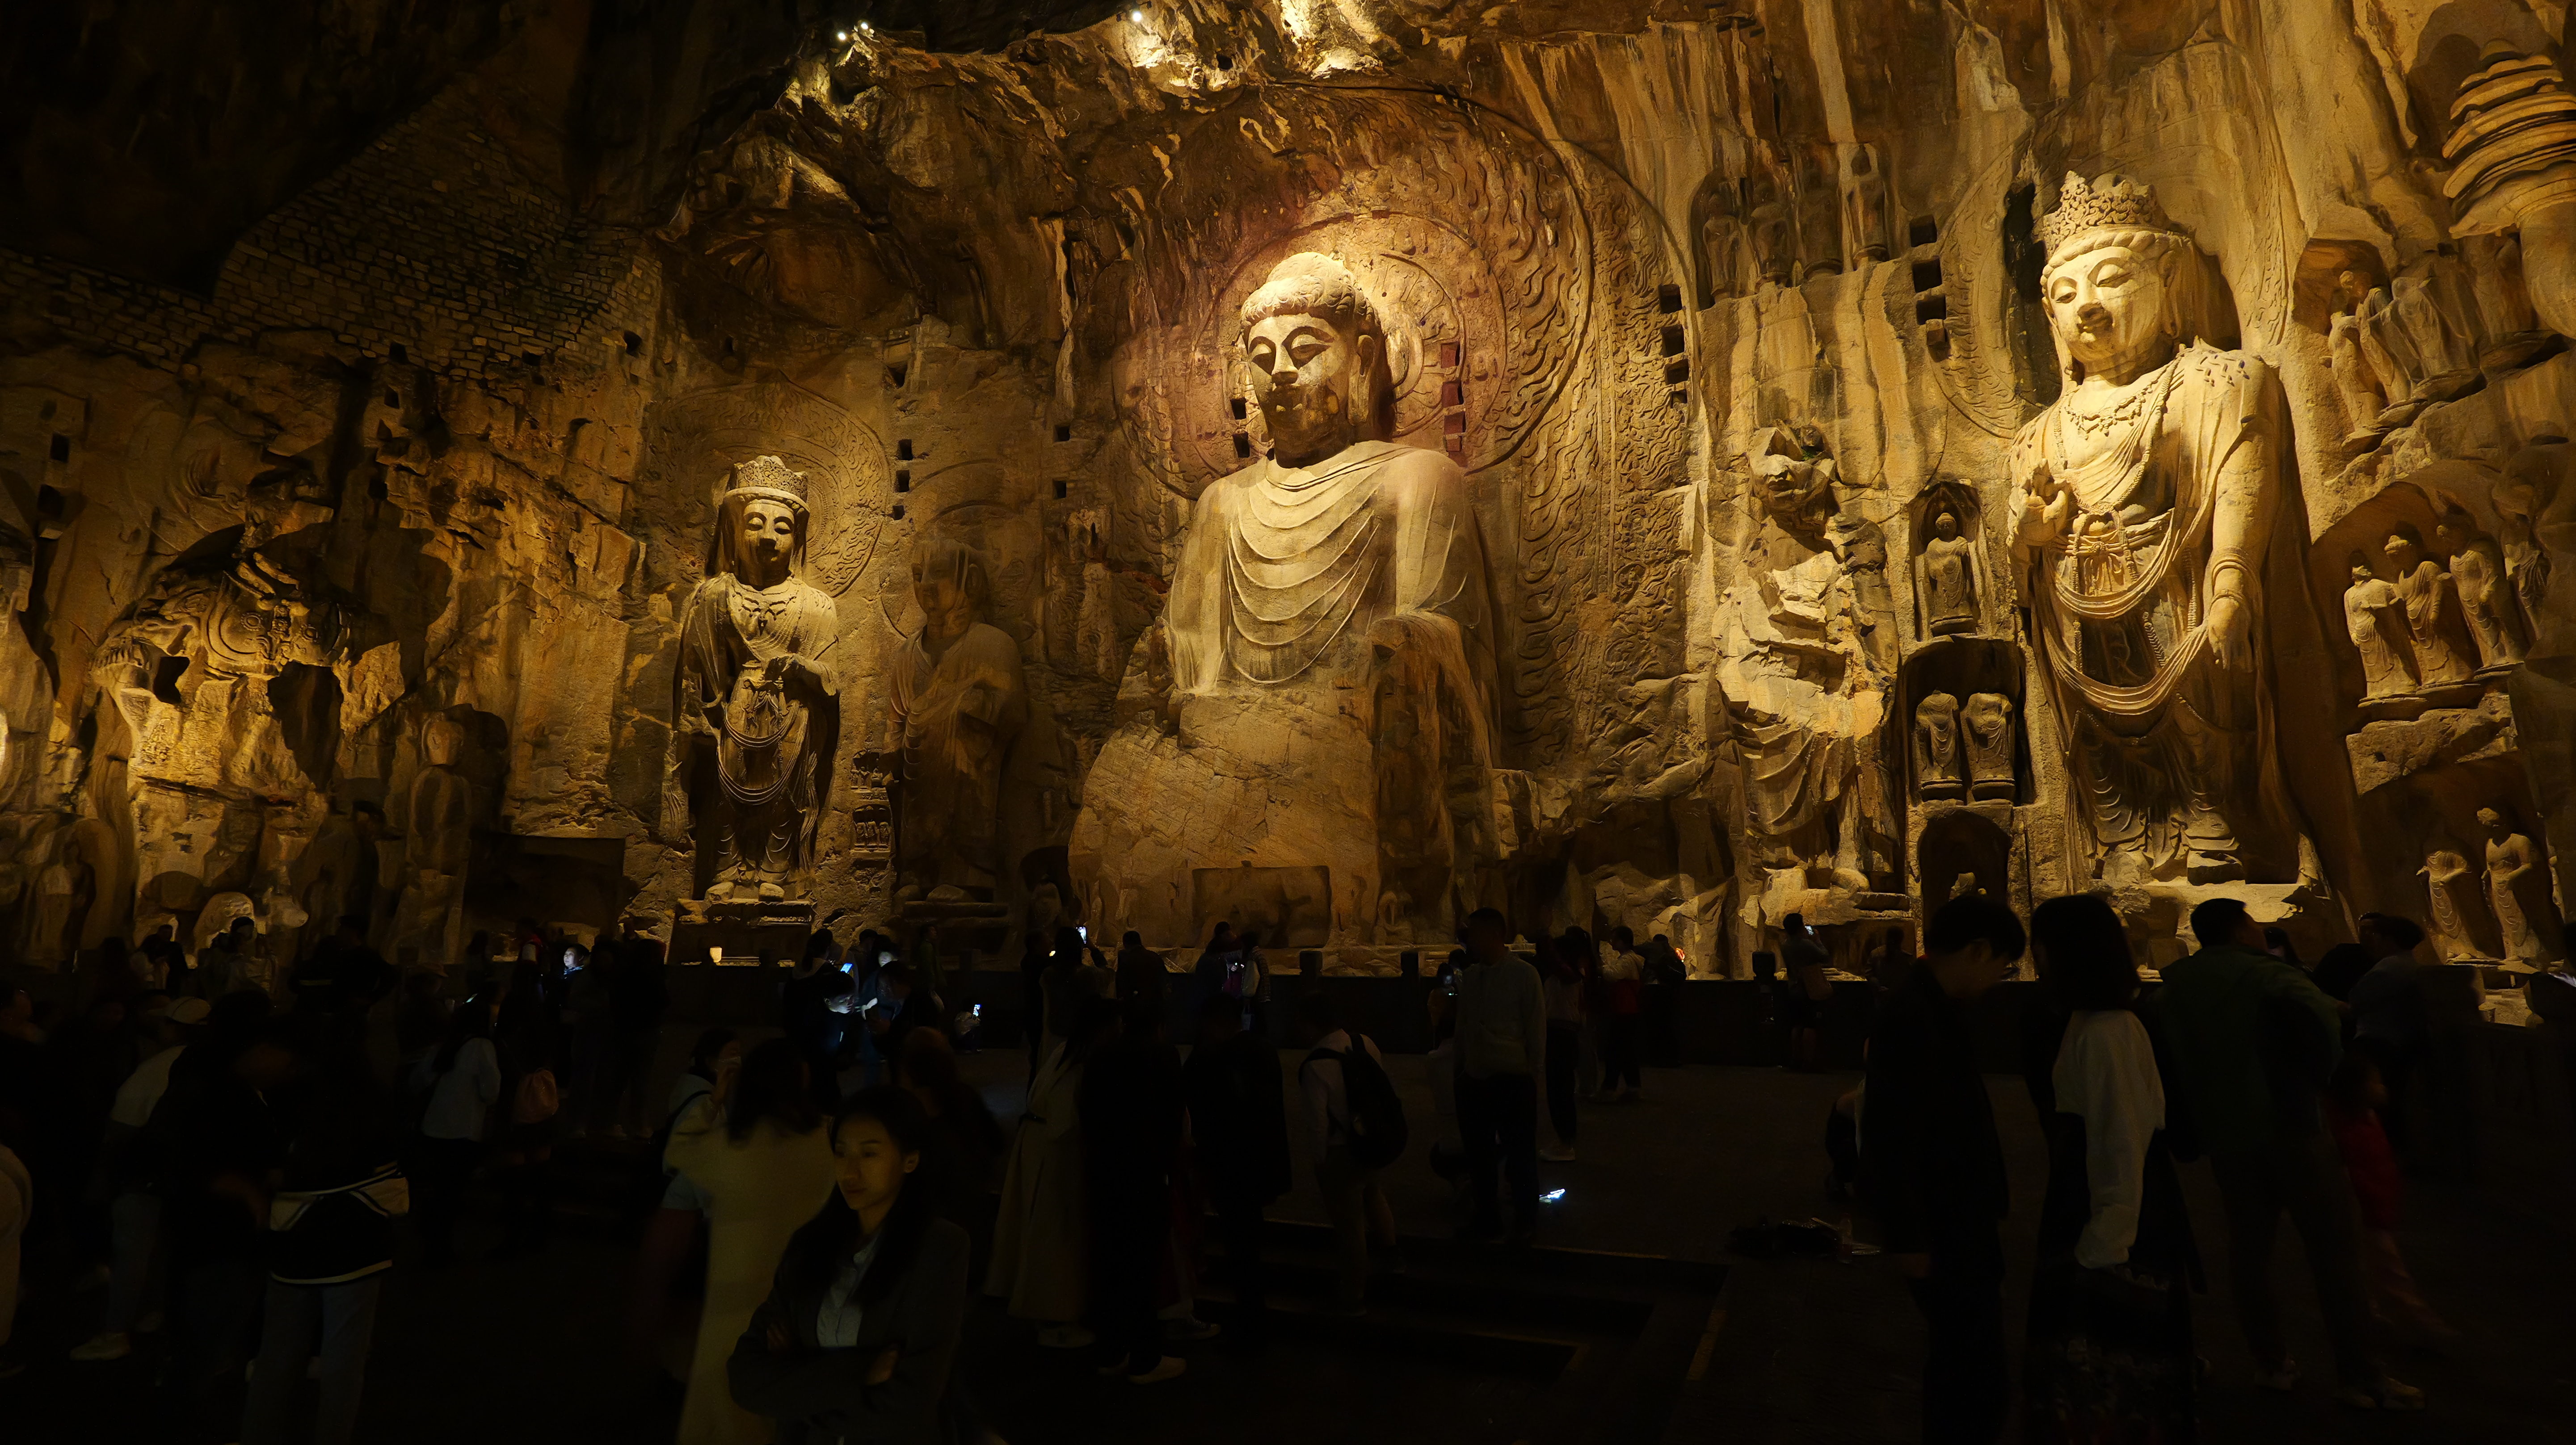 The illumination at night offers the Buddha statues an aura of mystery and grandeur. /IC  